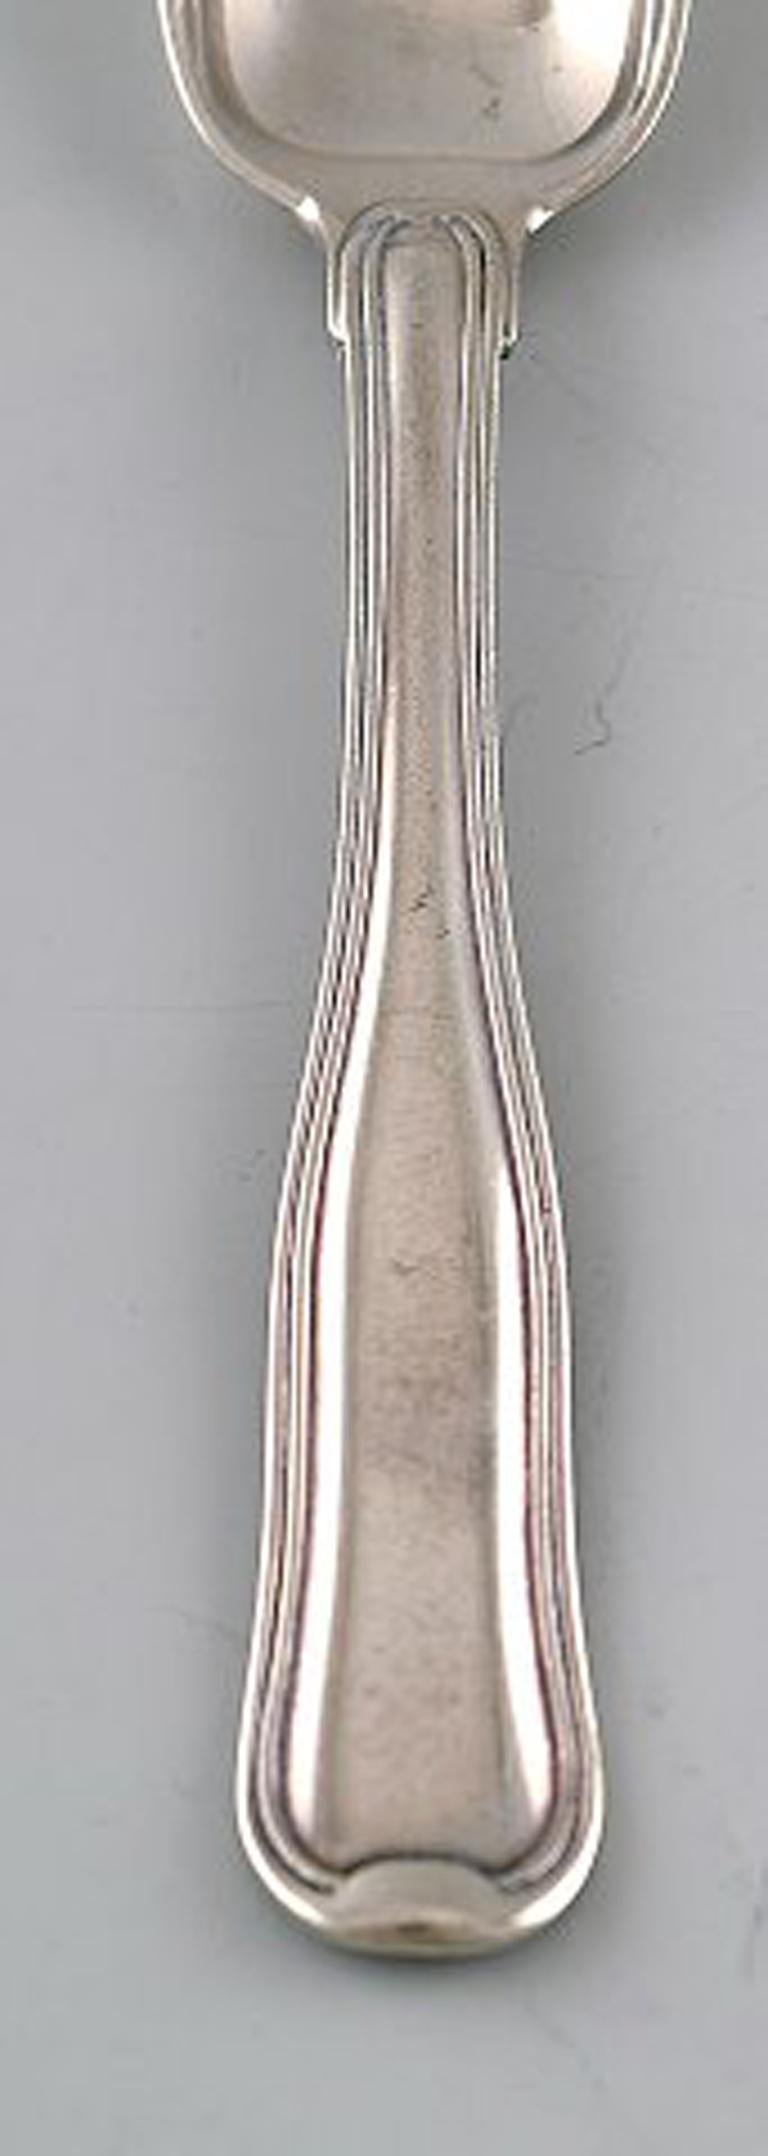 Georg Jensen Old Danish service. Coffee spoon. 7 pcs in stock.
Stamped.
In very good condition.
Measures: 11 cm.